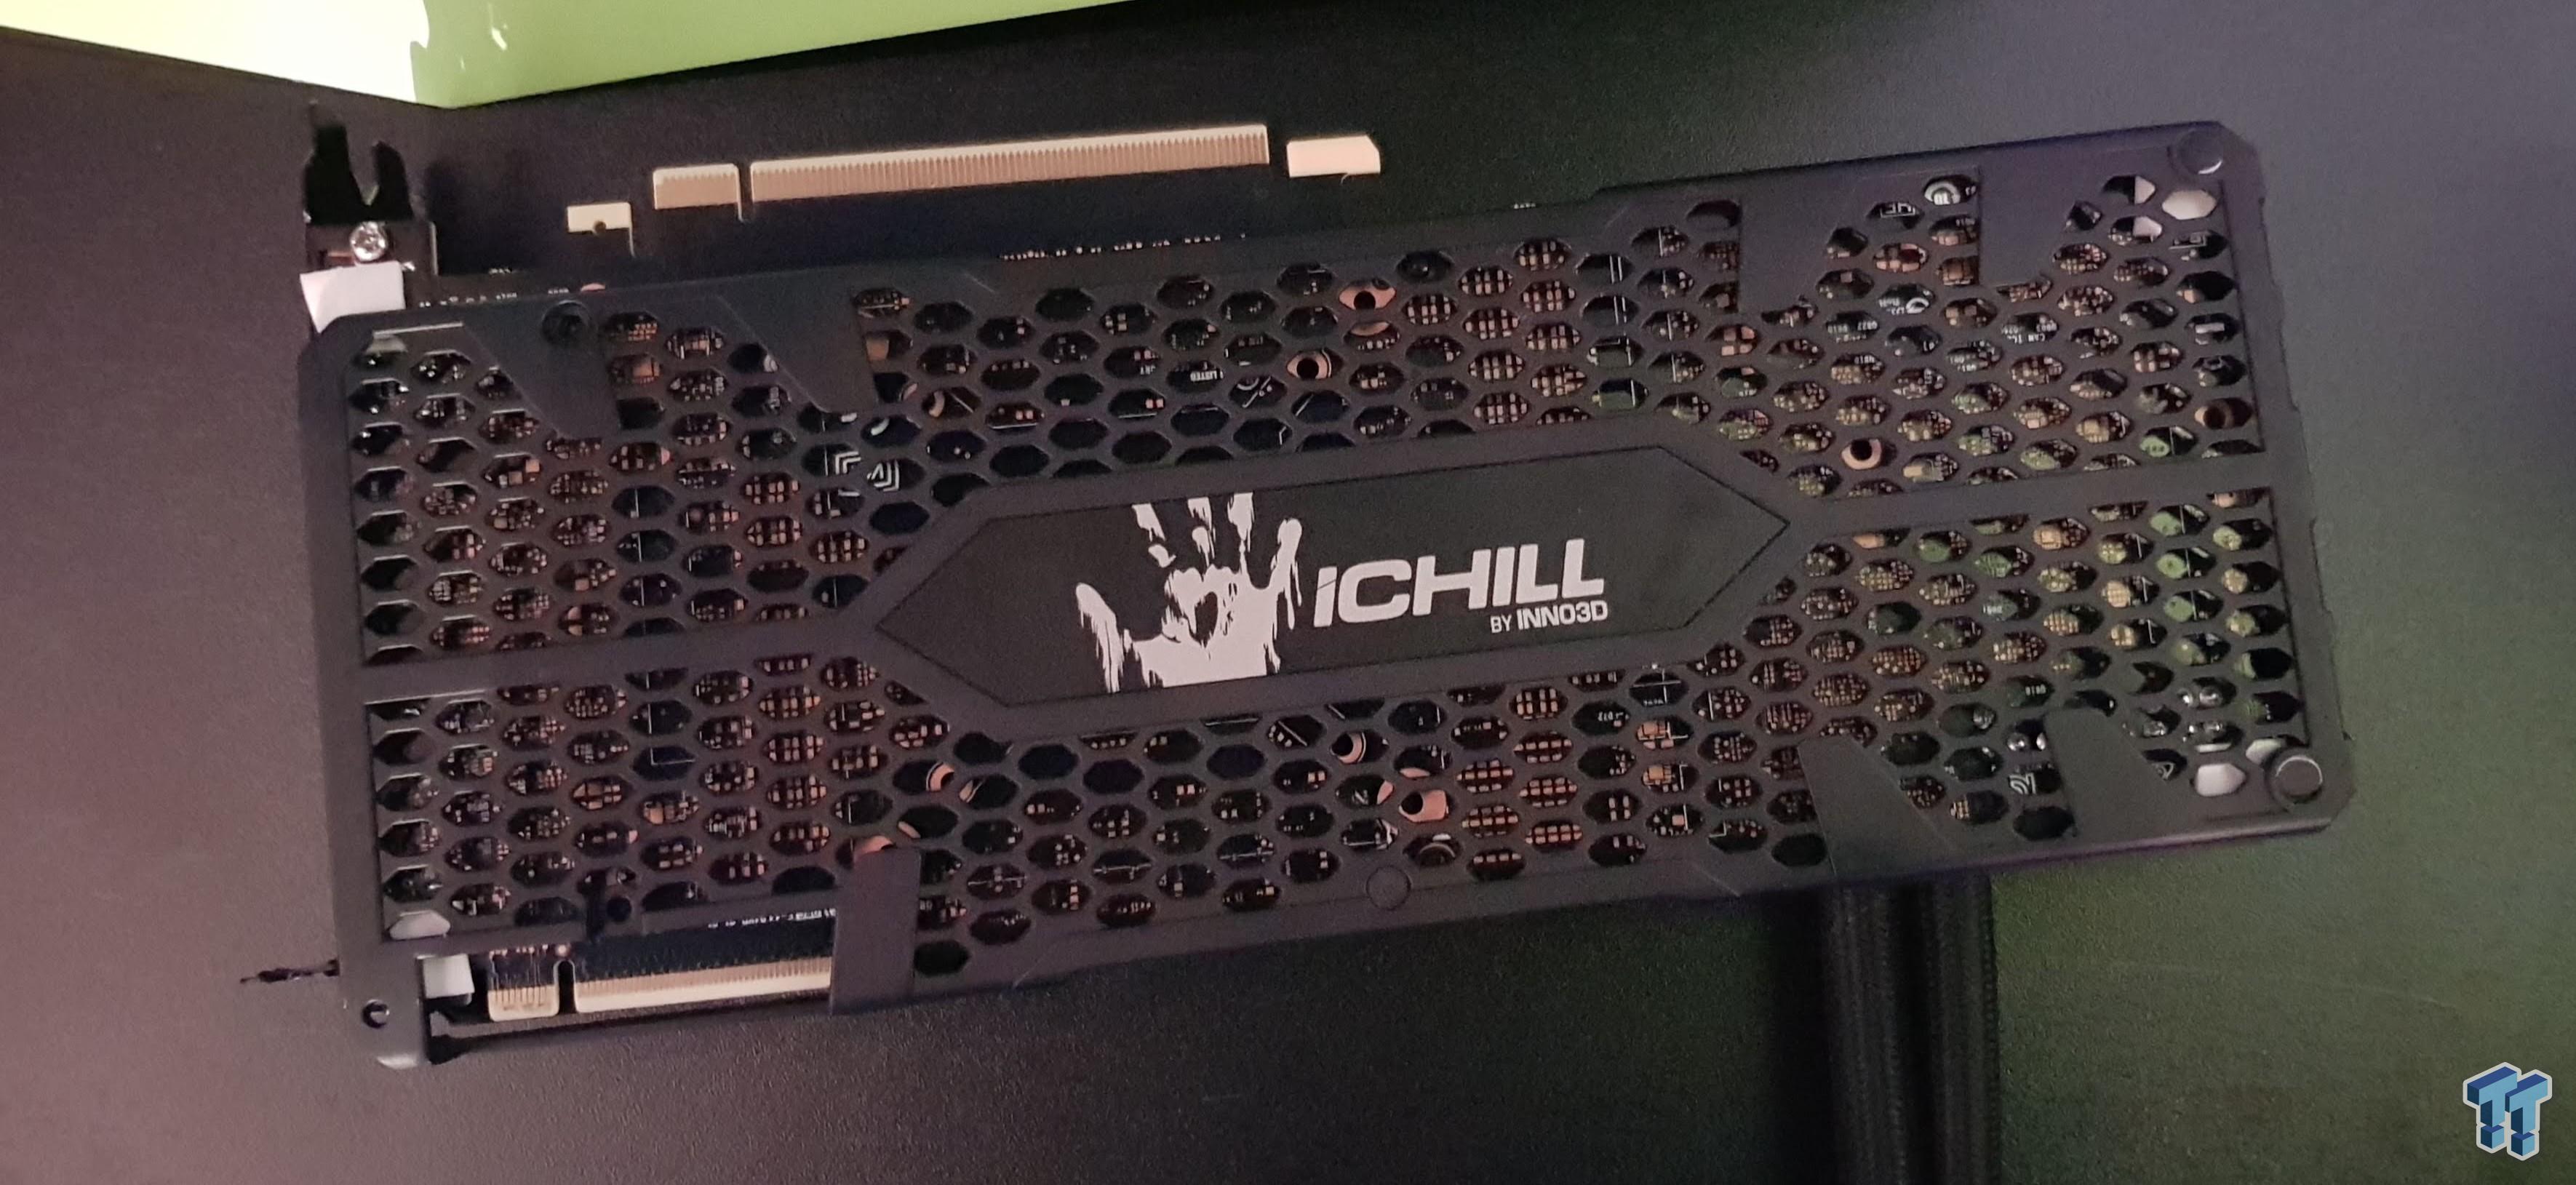 Our first look the GeForce RTX iChill